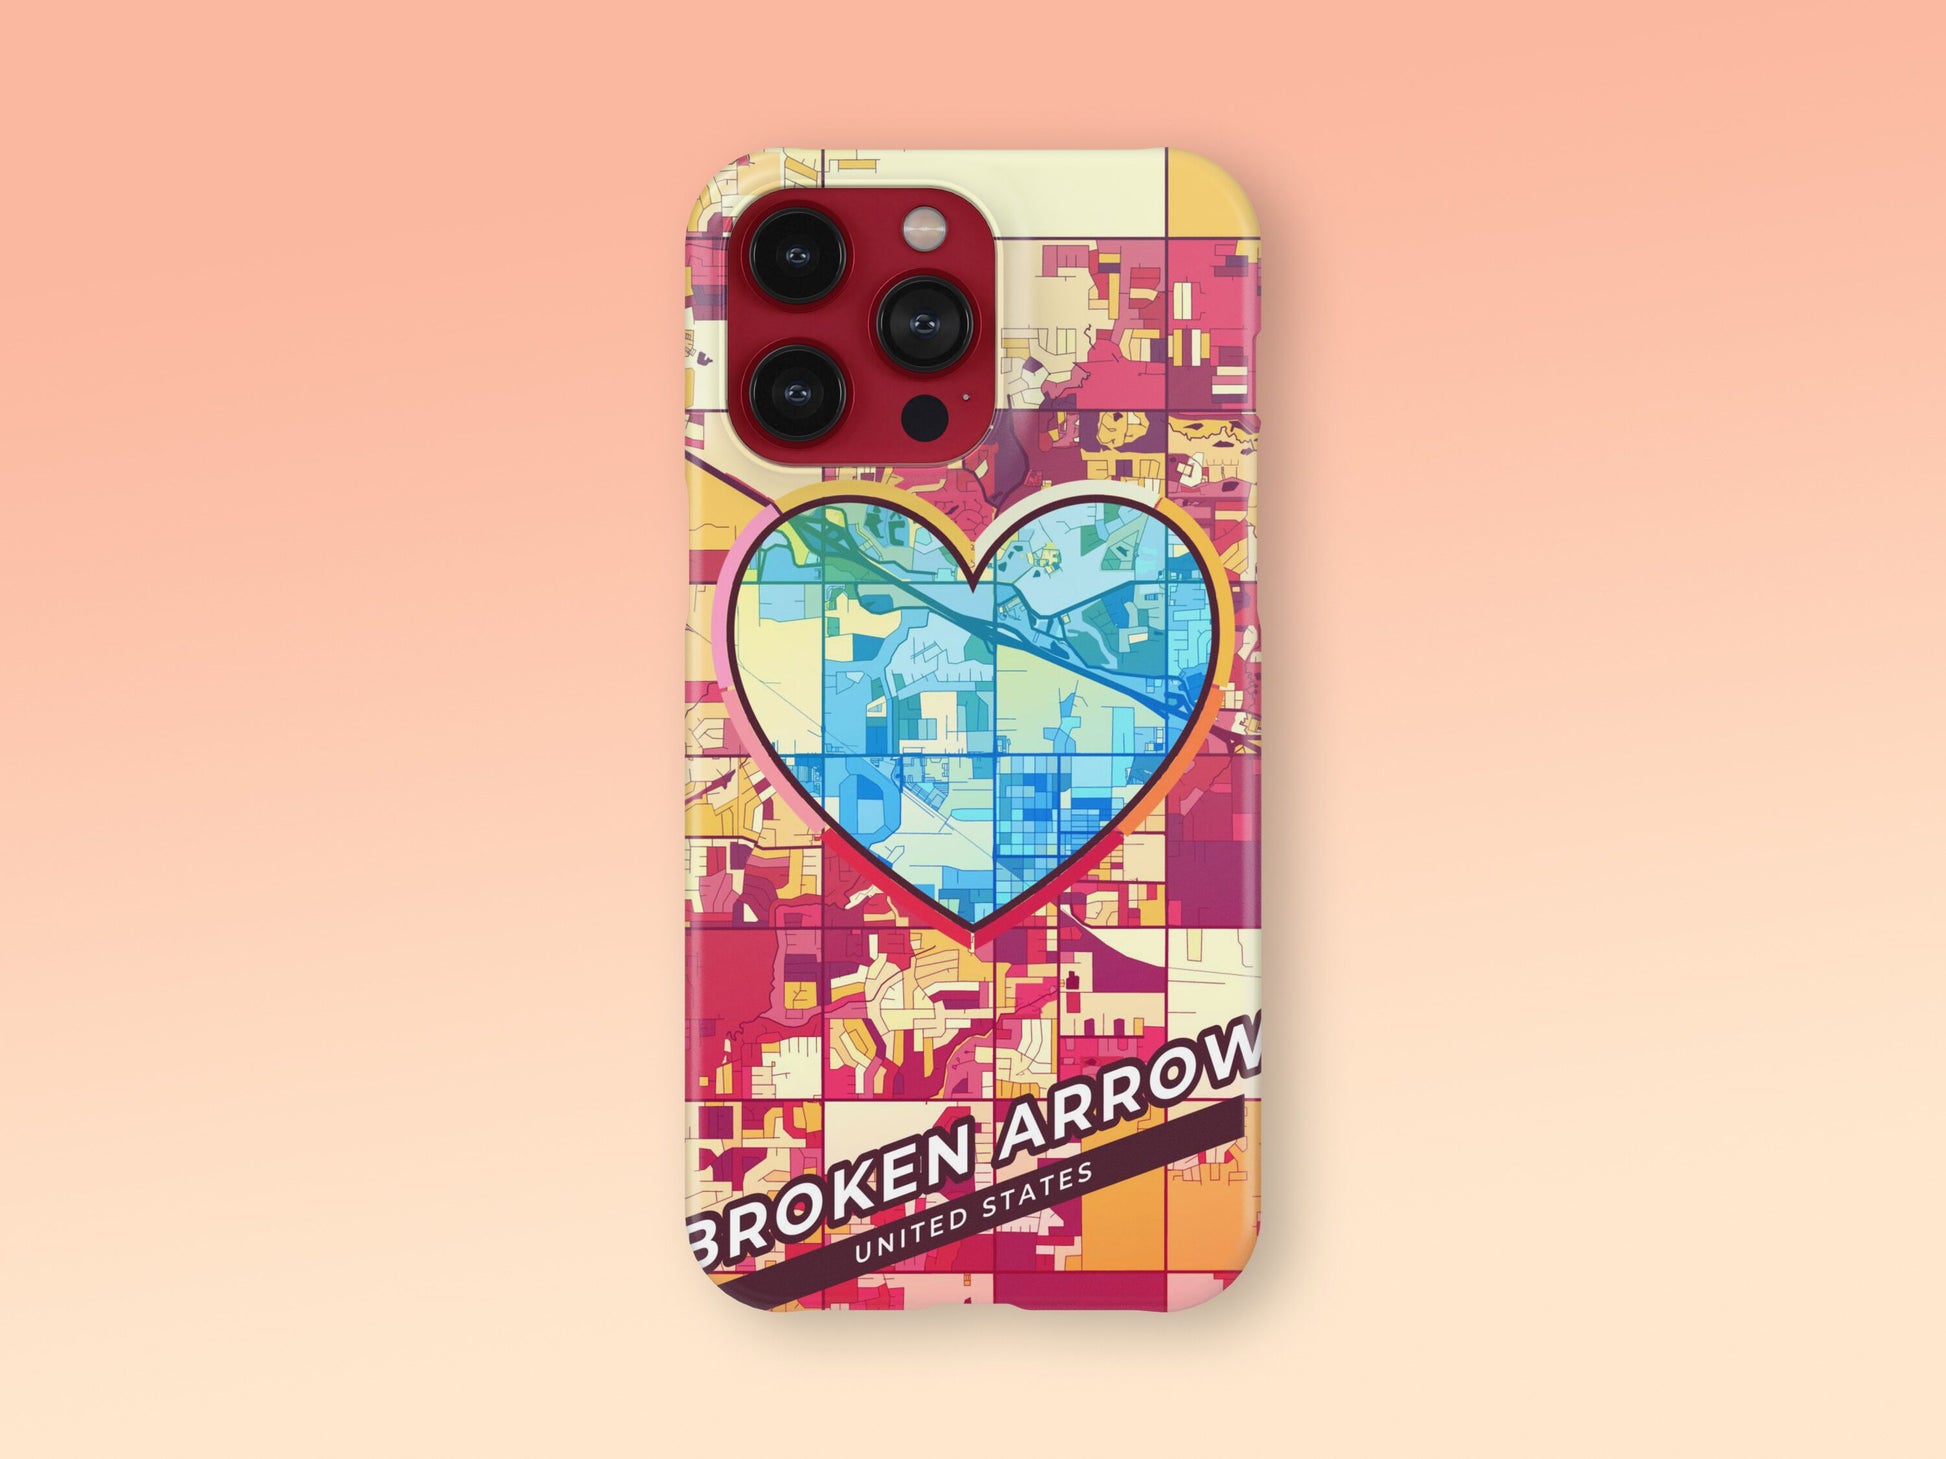 Broken Arrow Oklahoma slim phone case with colorful icon. Birthday, wedding or housewarming gift. Couple match cases. 2